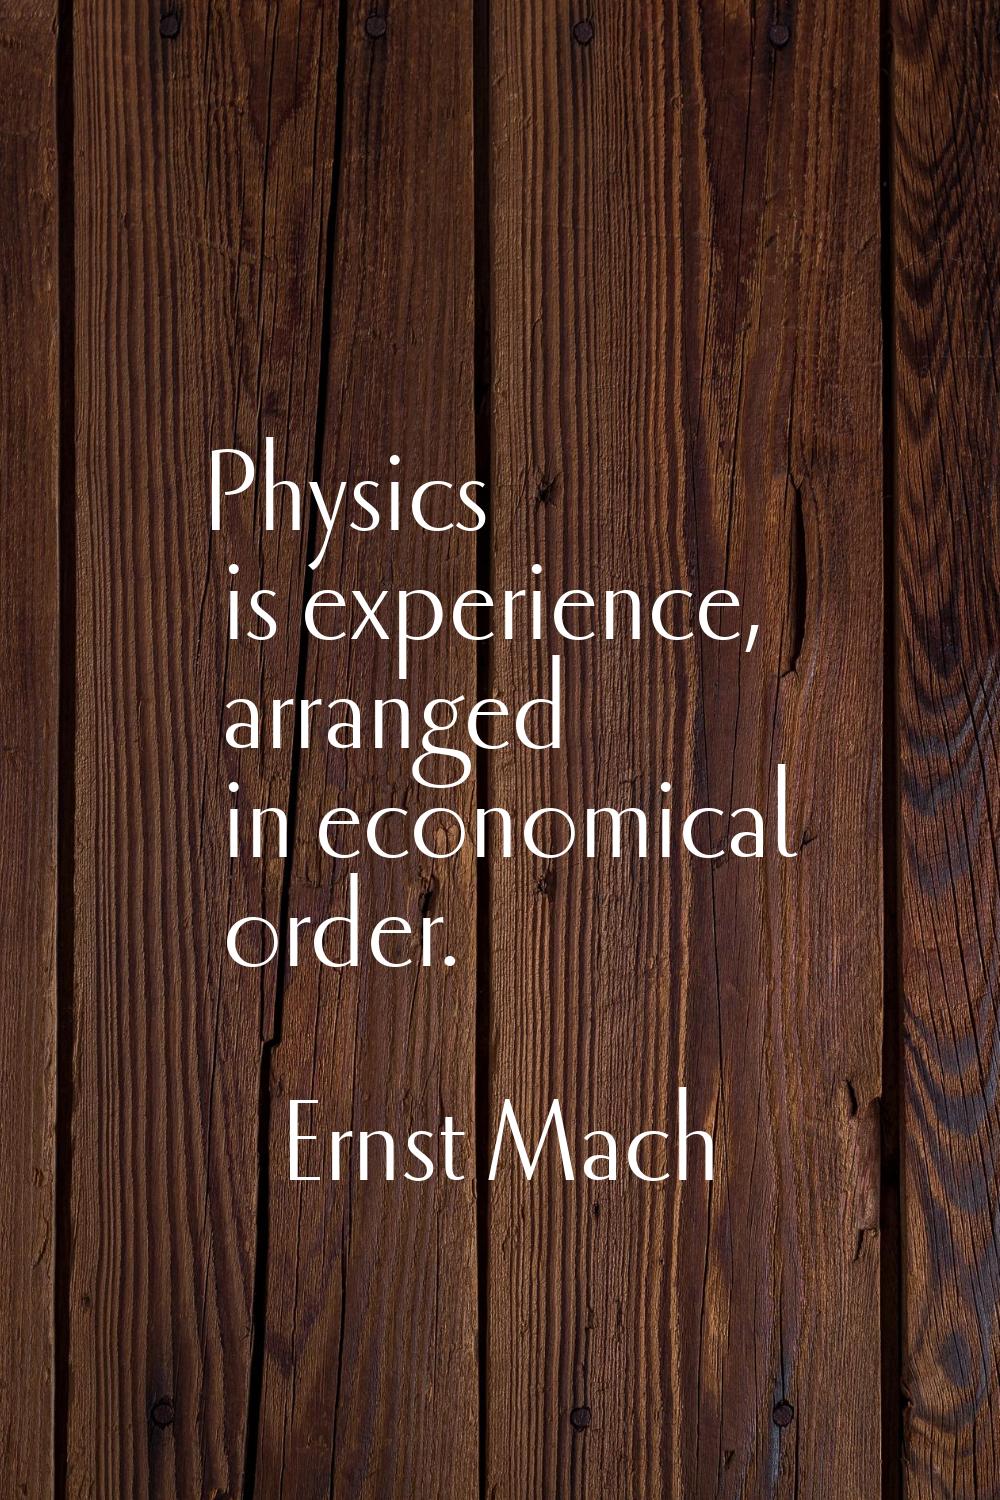 Physics is experience, arranged in economical order.